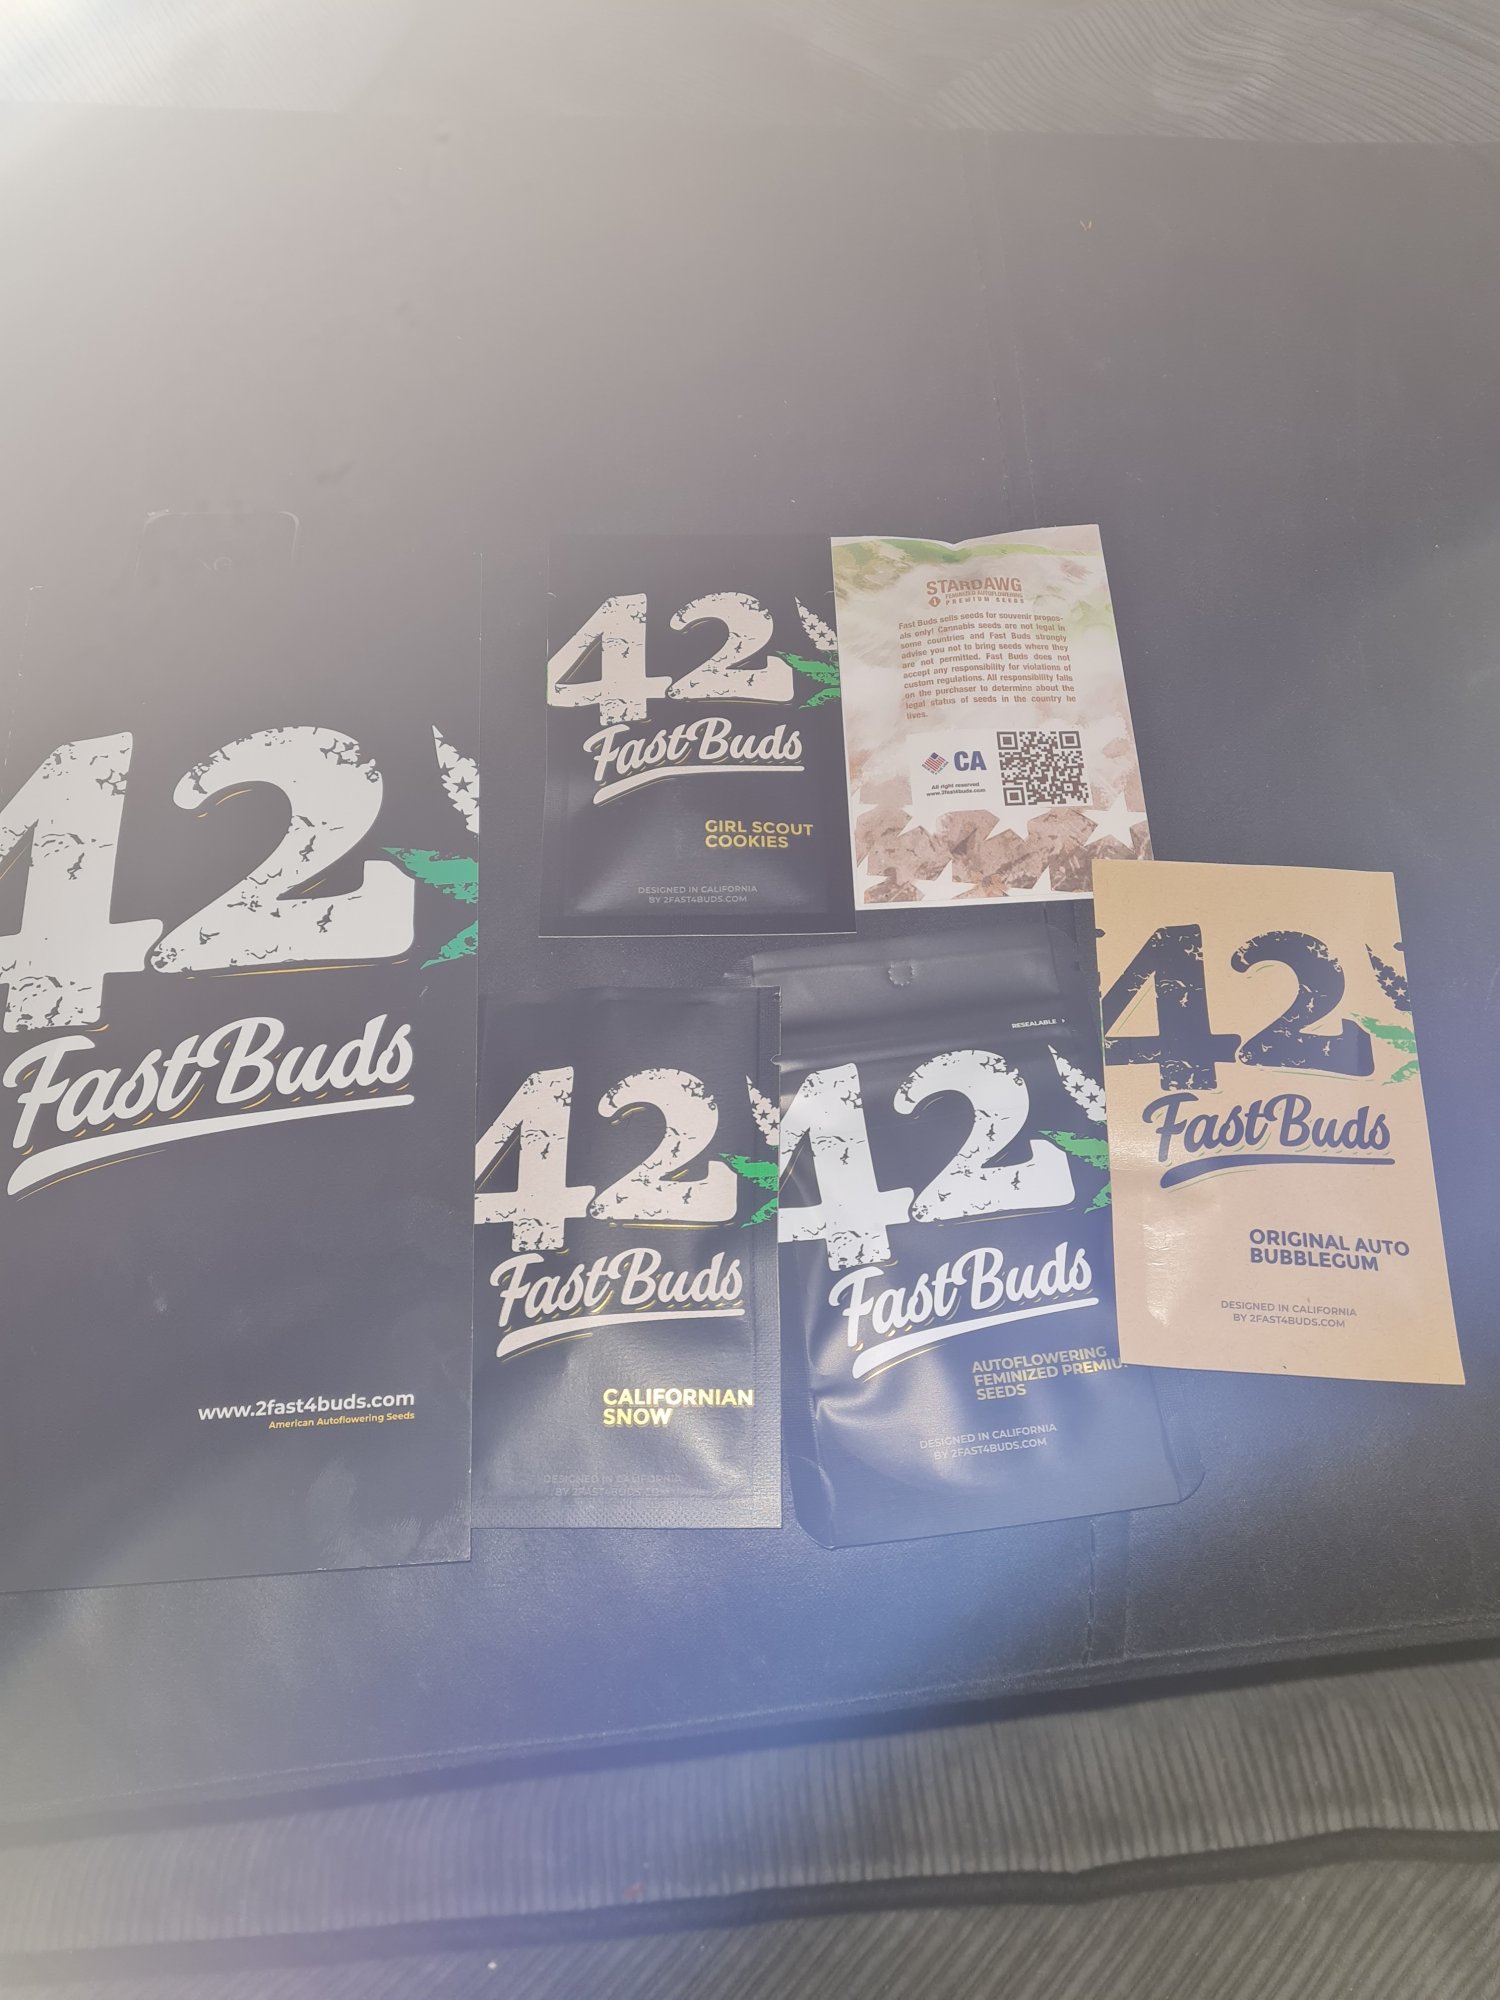 Fastbuds 420 anybody used these before